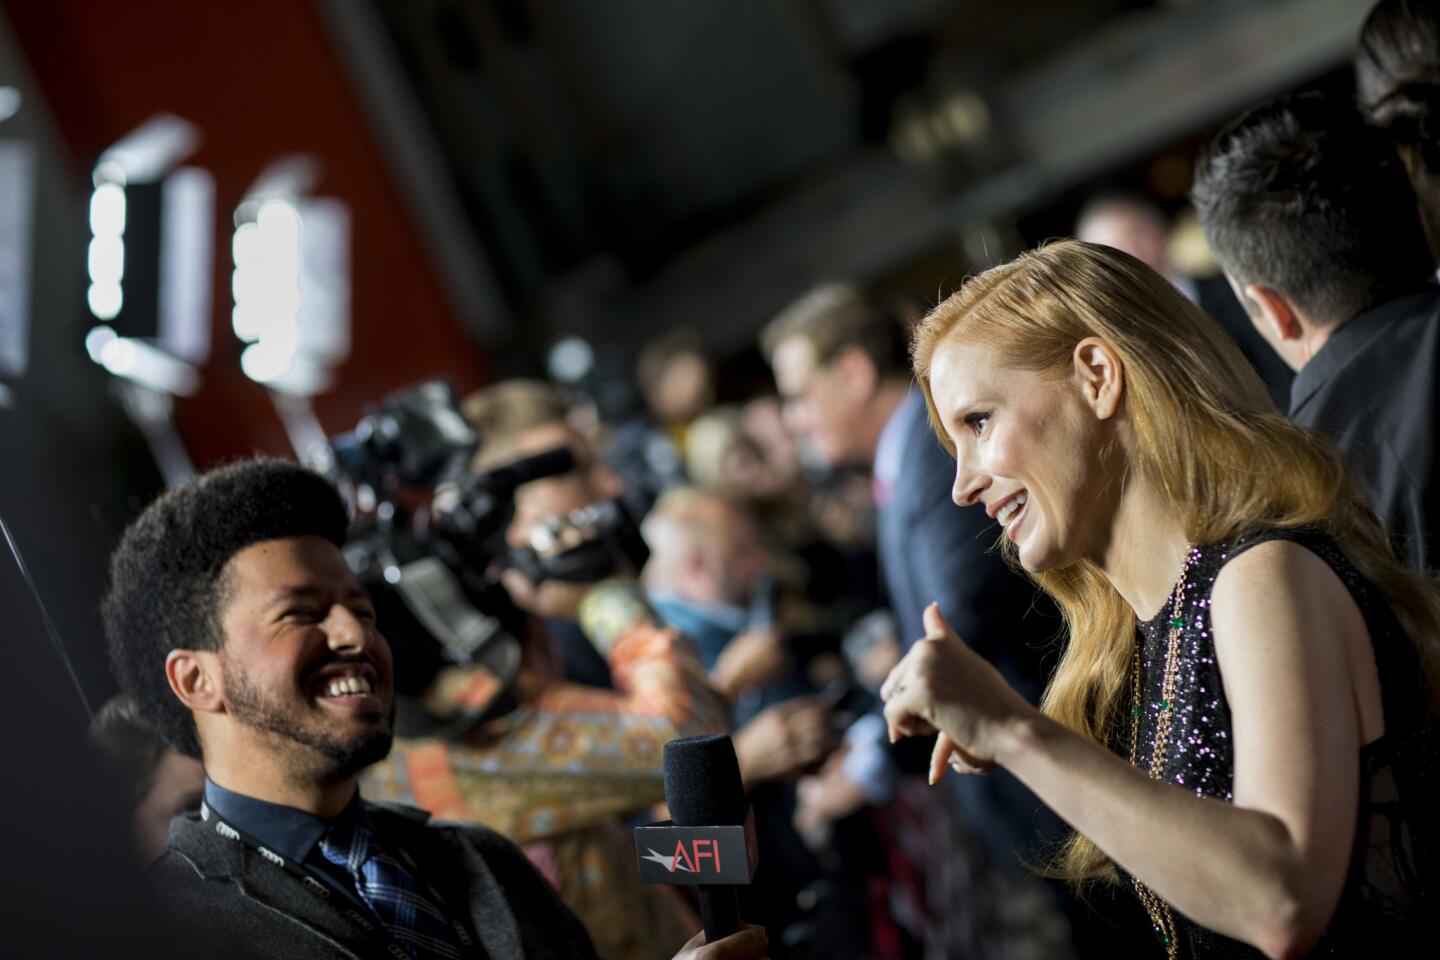 Actress Jessica Chastain works the red carpet for the AFI Fest's closing night gala presentation of the film "Molly's Game" on Thursday at TCL Chinese Theatre in Hollywood.